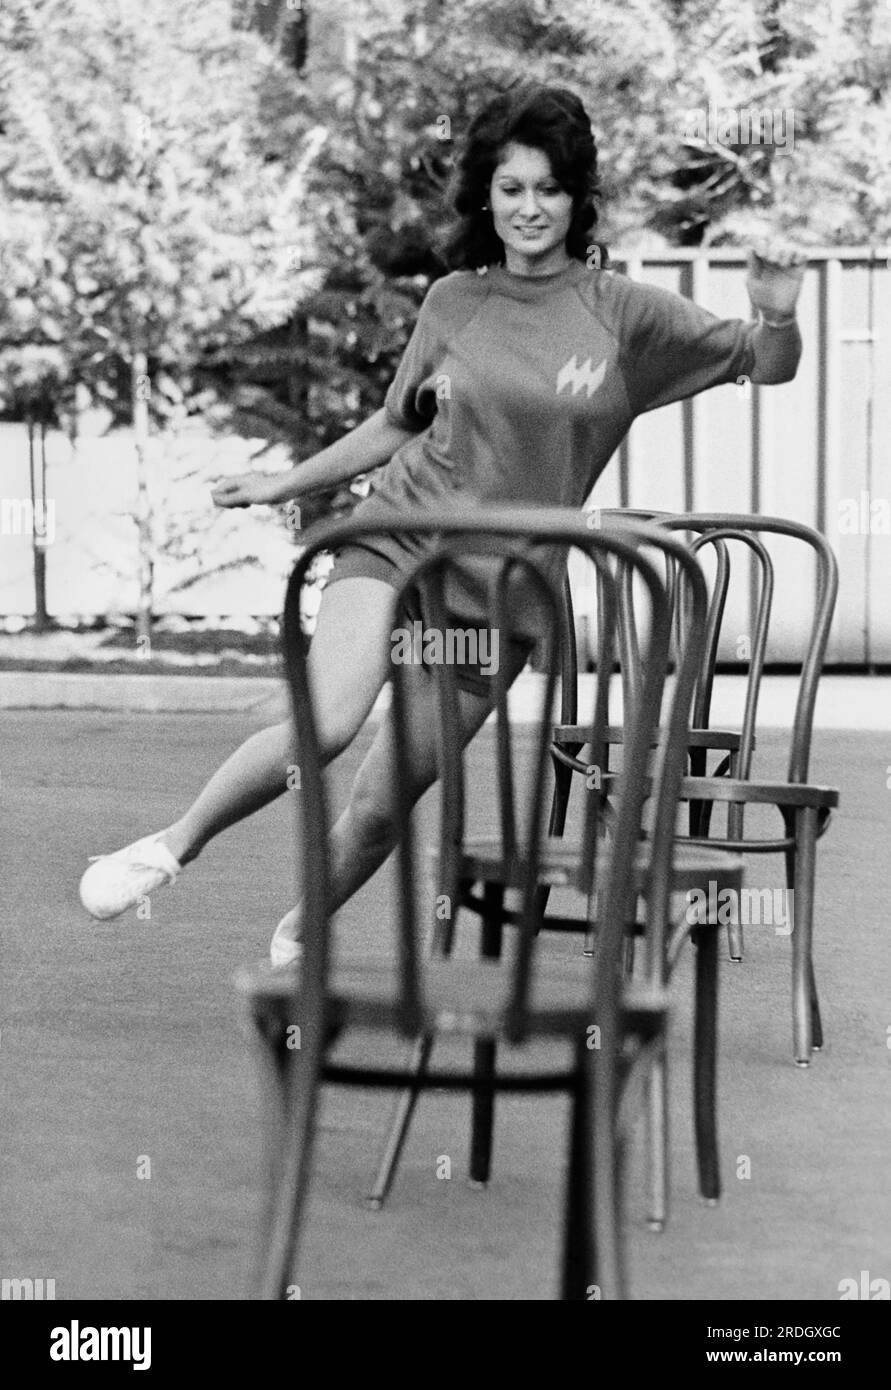 San Francisco, California:   c. 1975 Hughes Airwest stewardess trainees become the first in the industry to be certified physically fit by the YMCA. Trainee Linda Dellaripa negotiates the agility test. Stock Photo